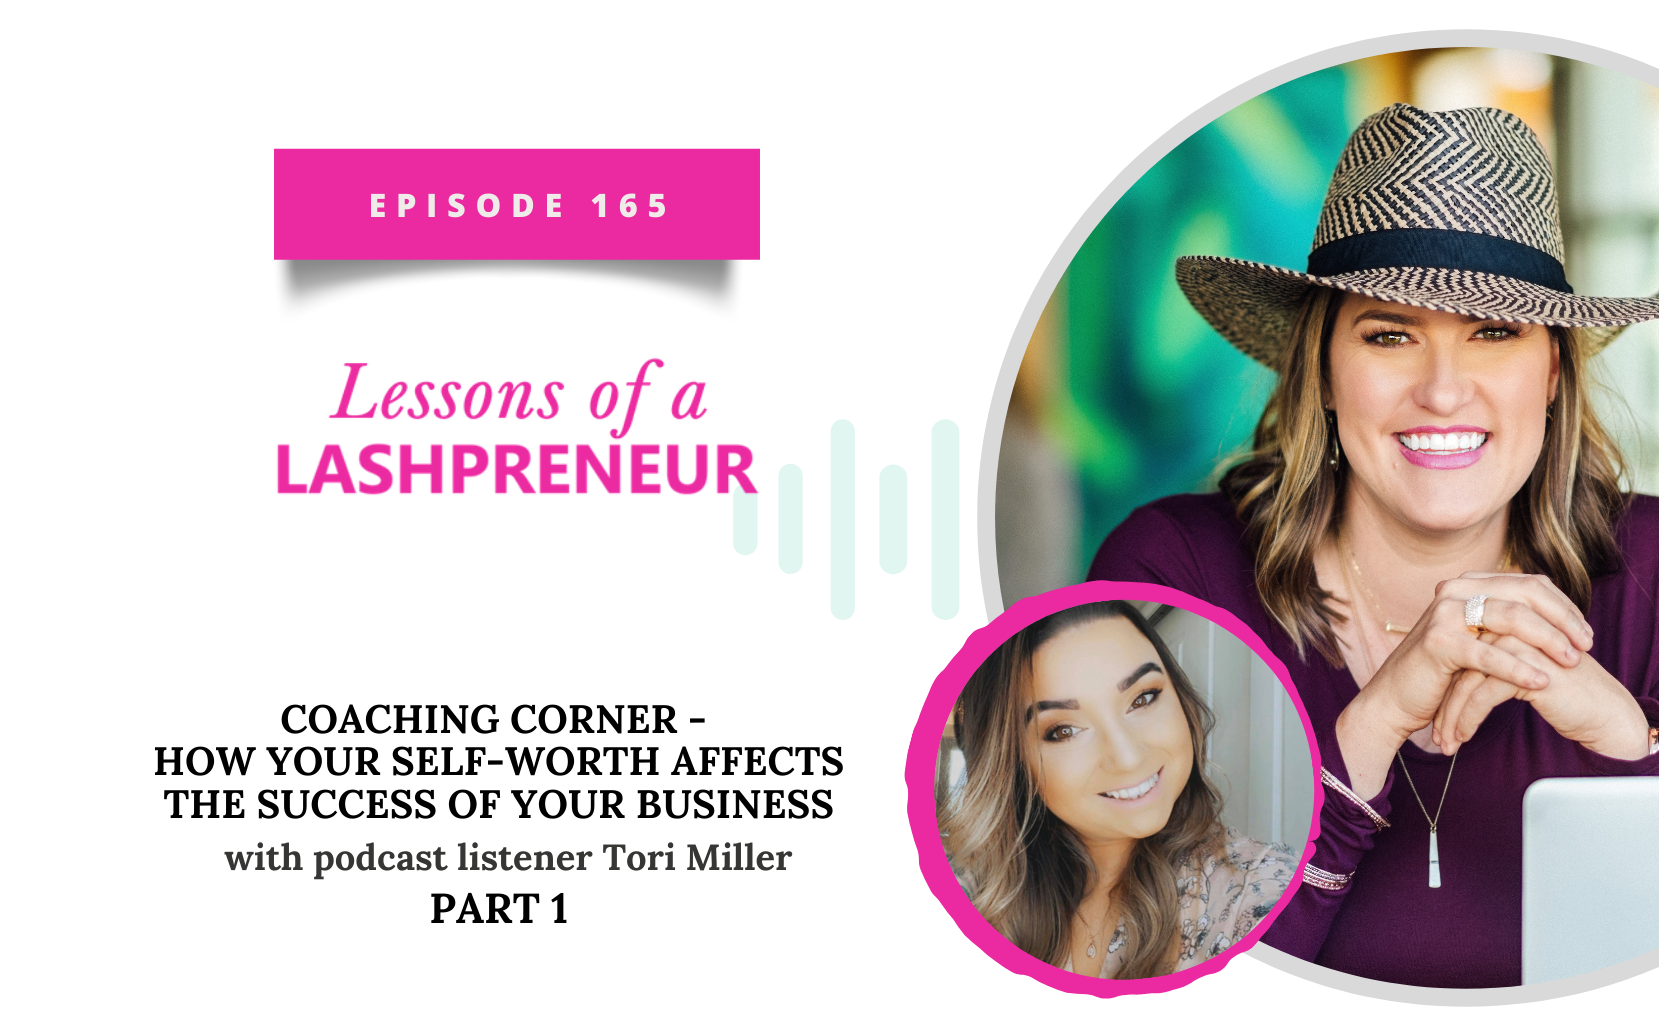 Coaching Corner: How Your Self-Worth Affects the Success of Your Business with podcast listener Tori Miller Part 1